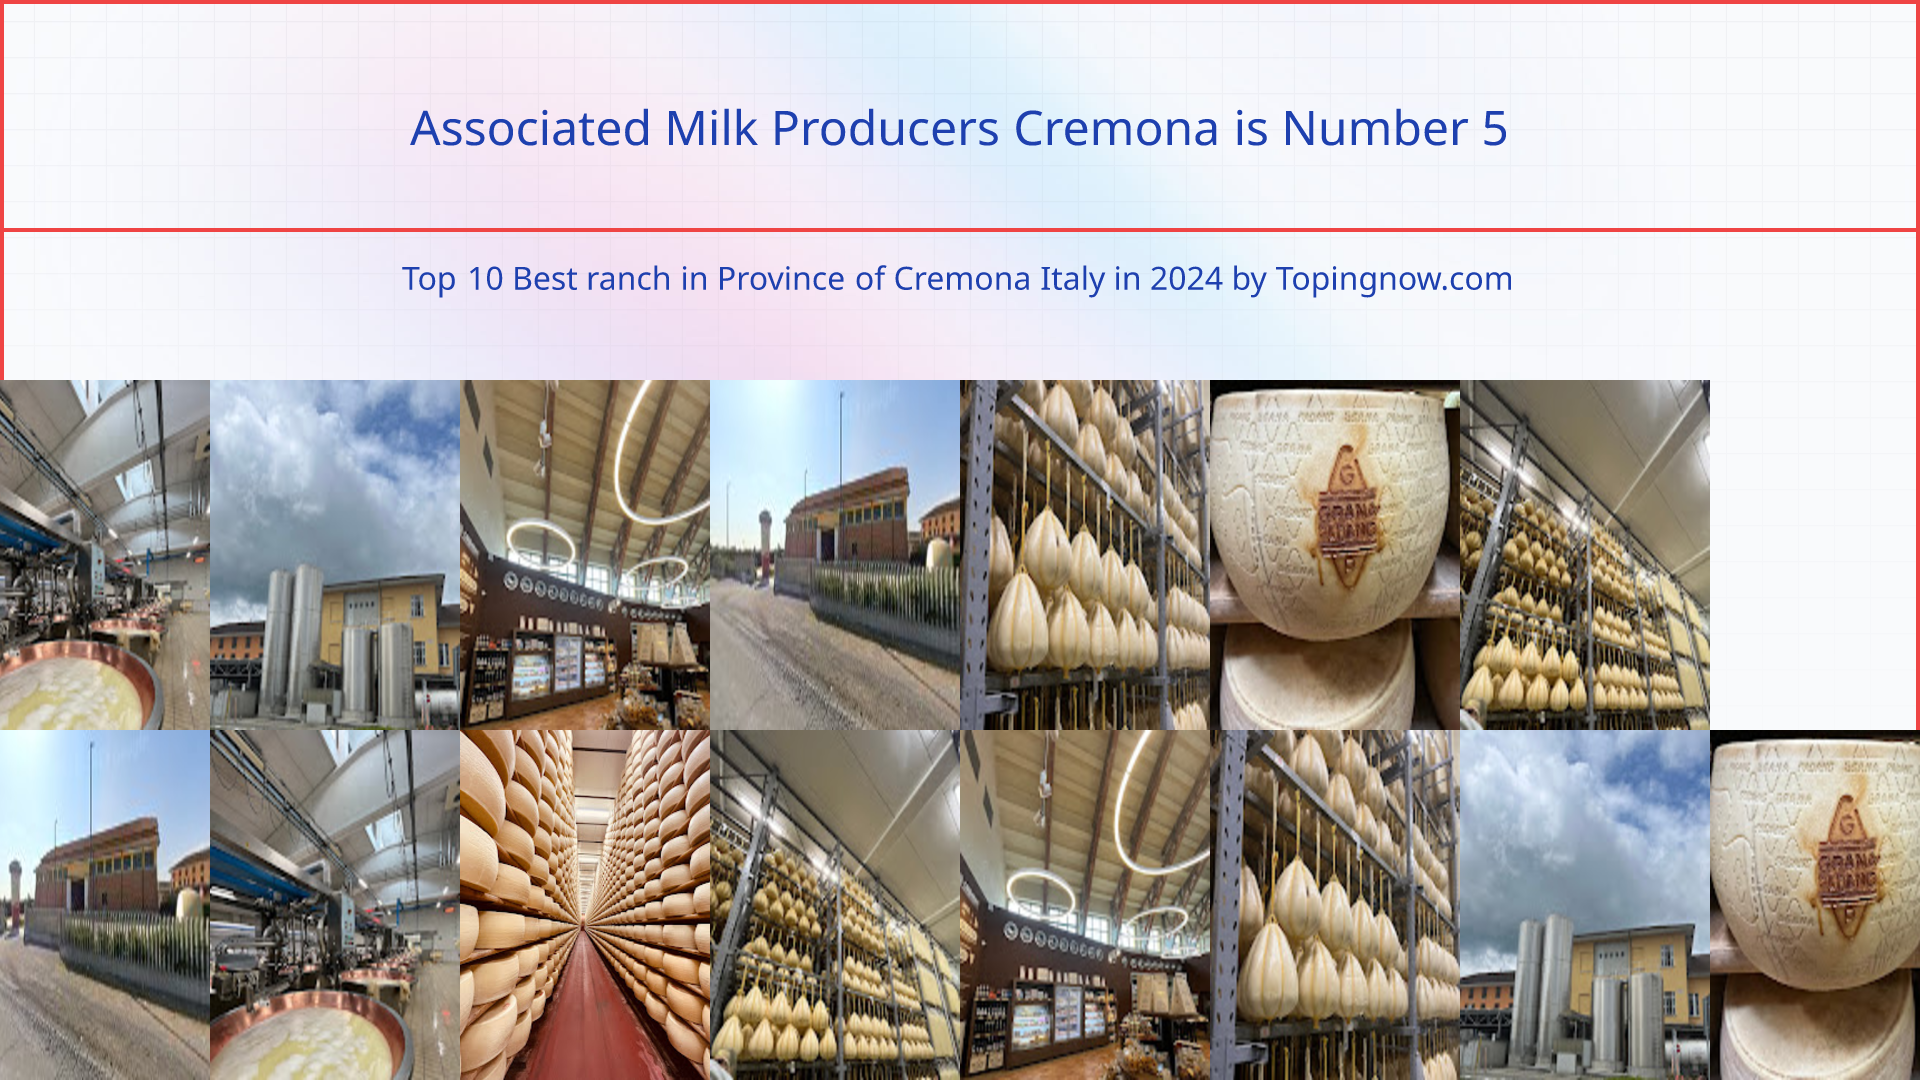 Associated Milk Producers Cremona: Top 10 Best ranch in Province of Cremona Italy in 2024